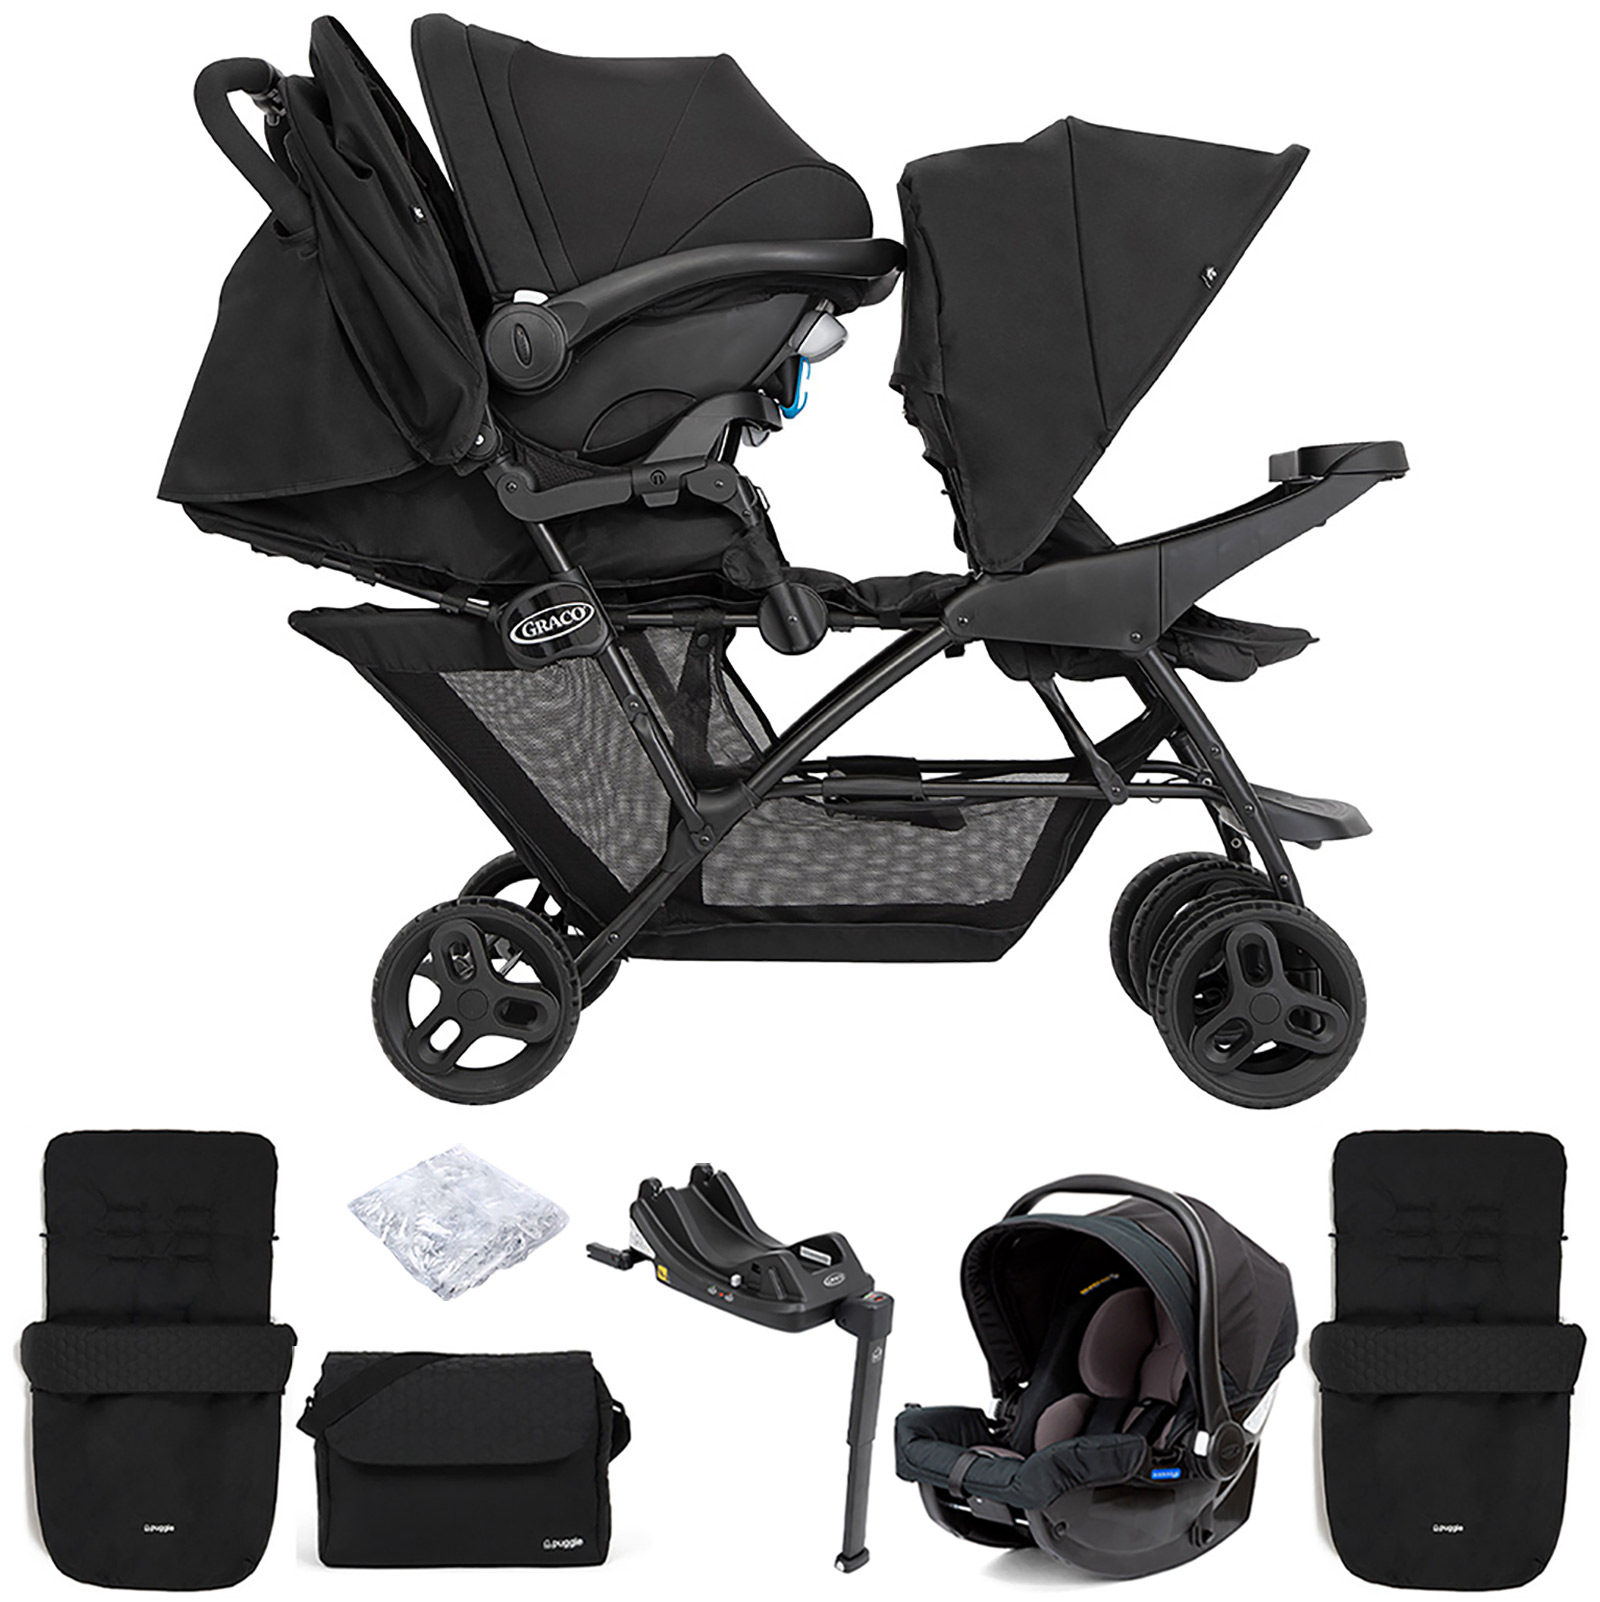 Graco Blaaze™ Stadium Duo Tandem Travel System with Front Apron, Raincover, 2 Footmuffs, Changing Bag, Car Seat & Base - Night Sky